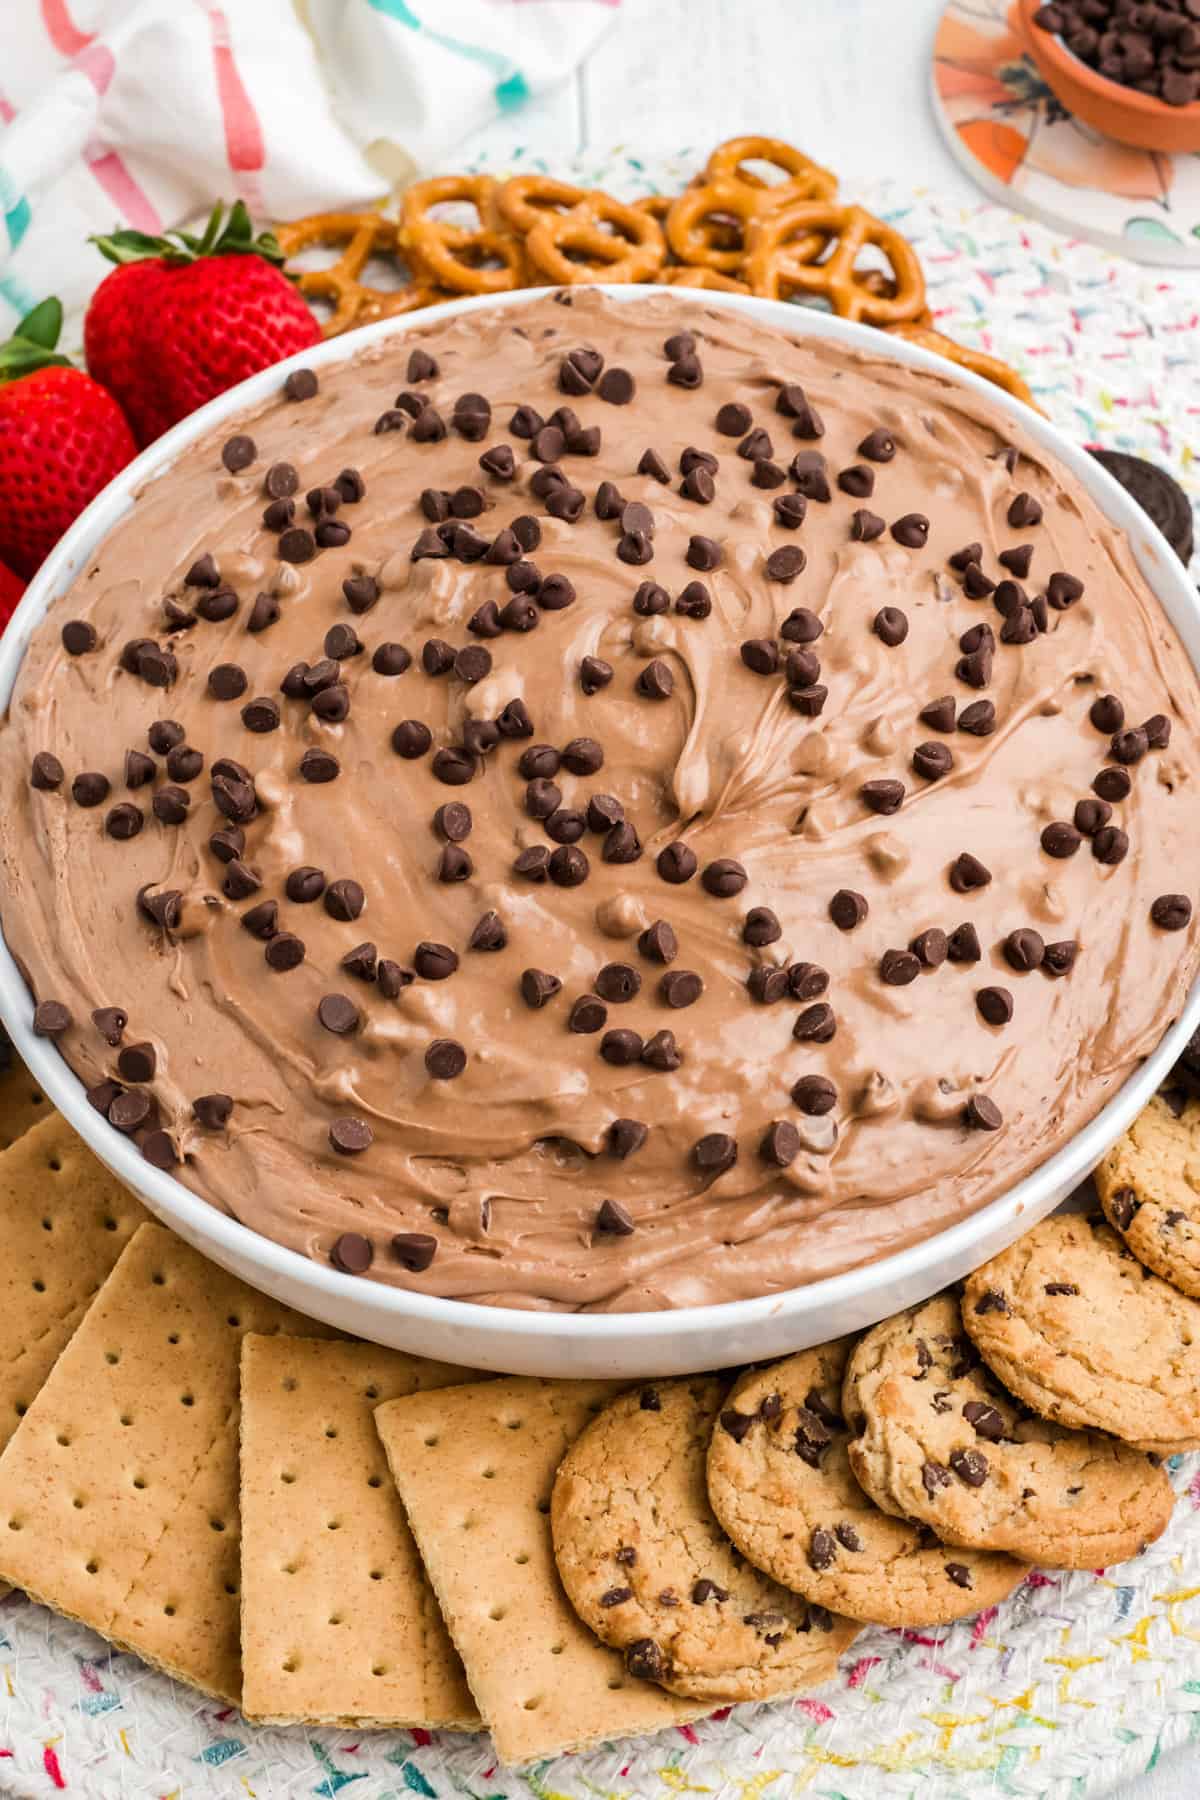 Creamy brownie dip served with a variety of dippers.